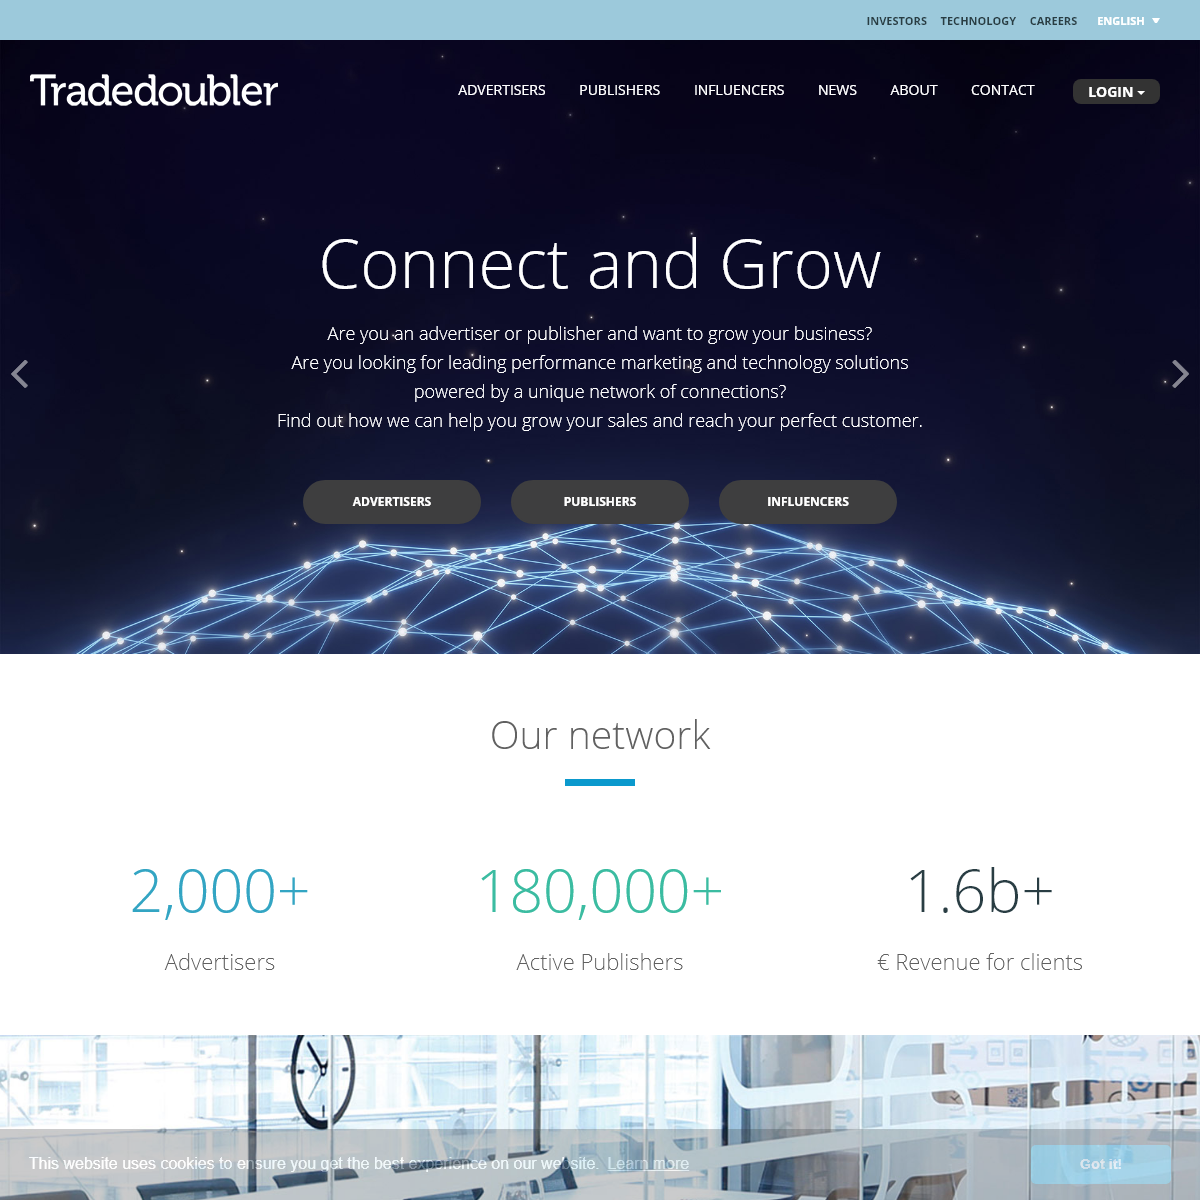 A complete backup of tradedoubler.com